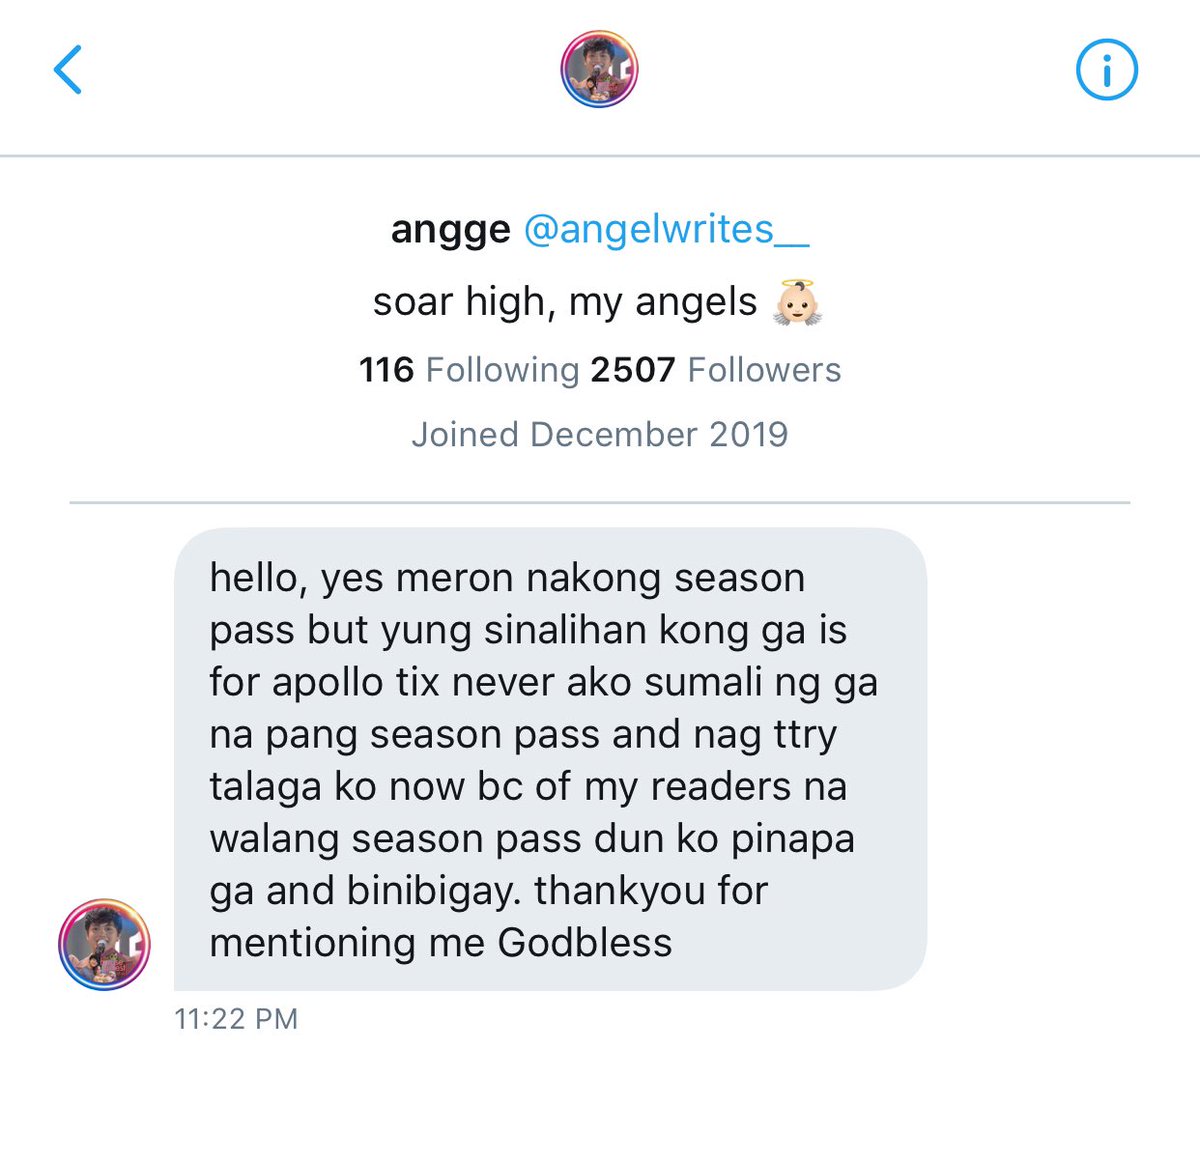 A friend of mine alr got a response from her even before I posted this thread and she deactivated. Just be the judge, di ko kayang sikmurain 'to :)